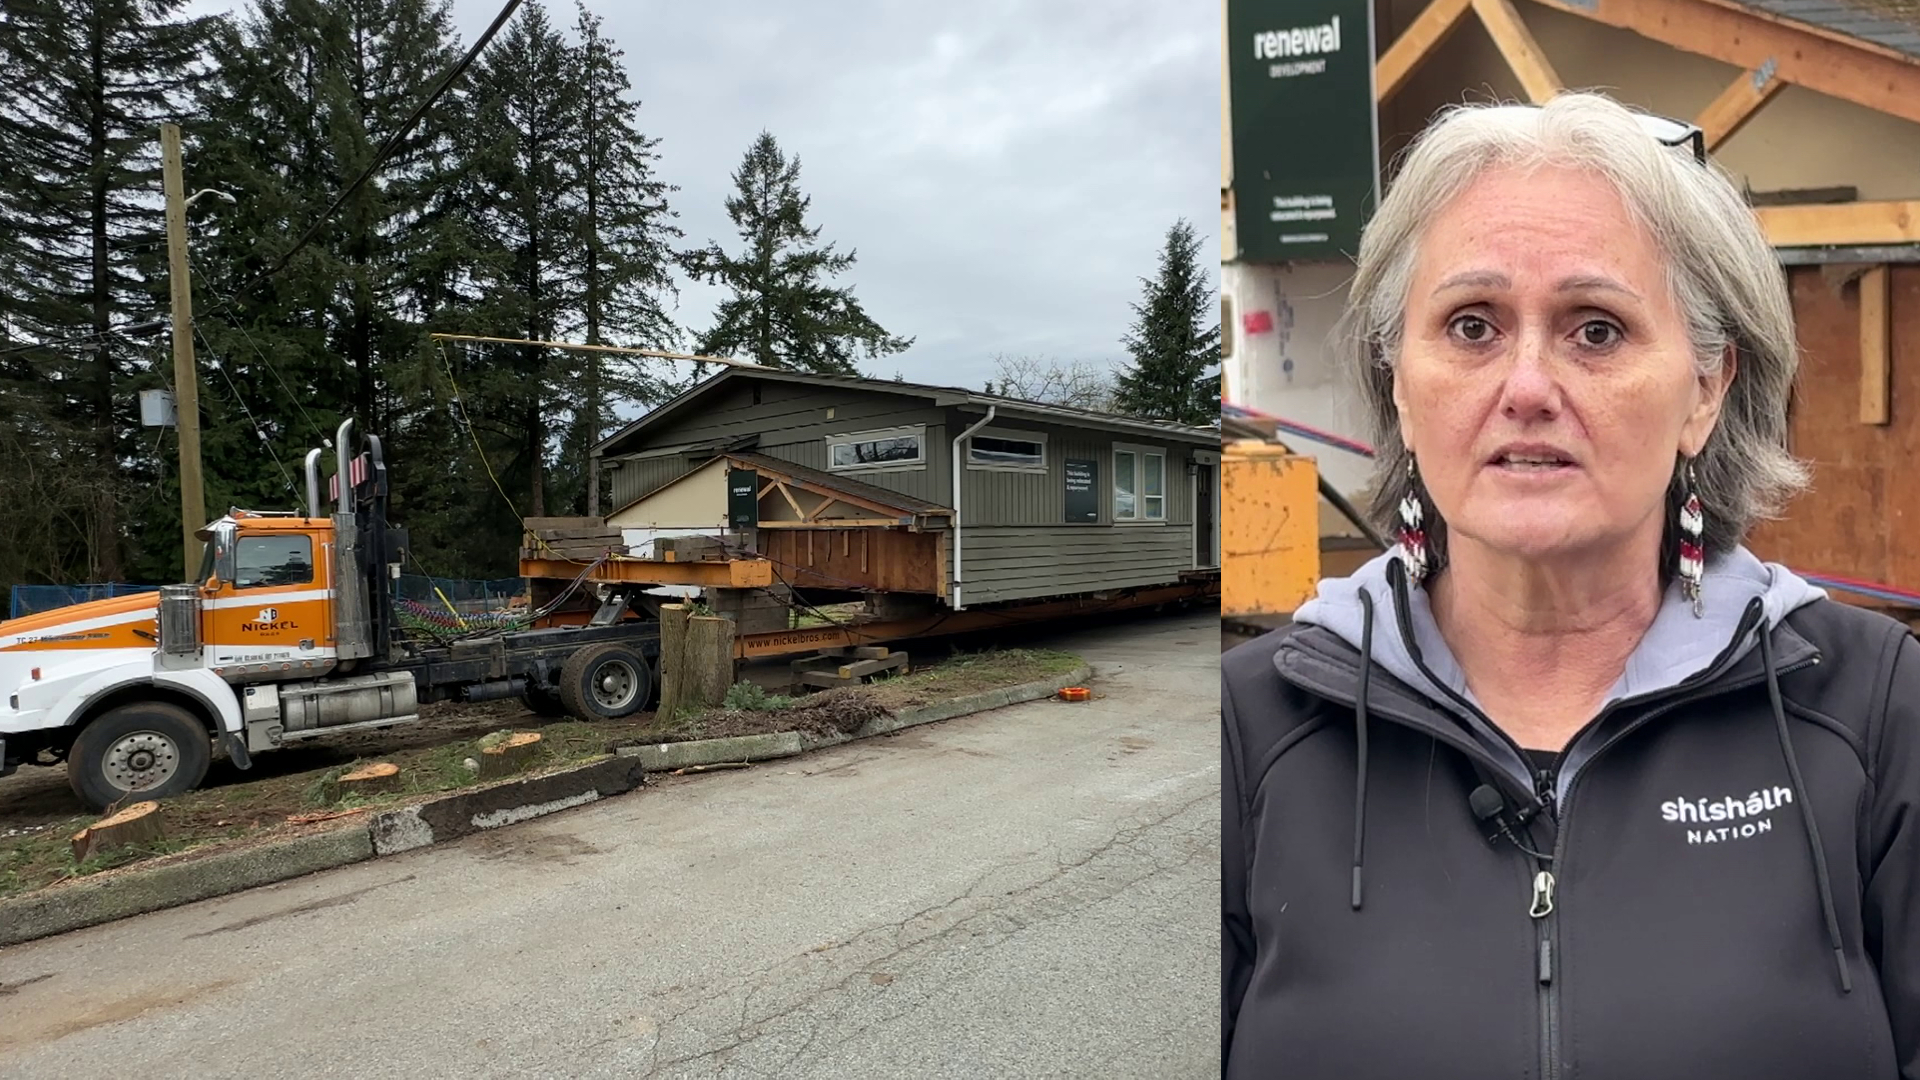 Ten Port Moody homes to be relocated and repurposed on Sunshine Coast, in Shishalh Nation community